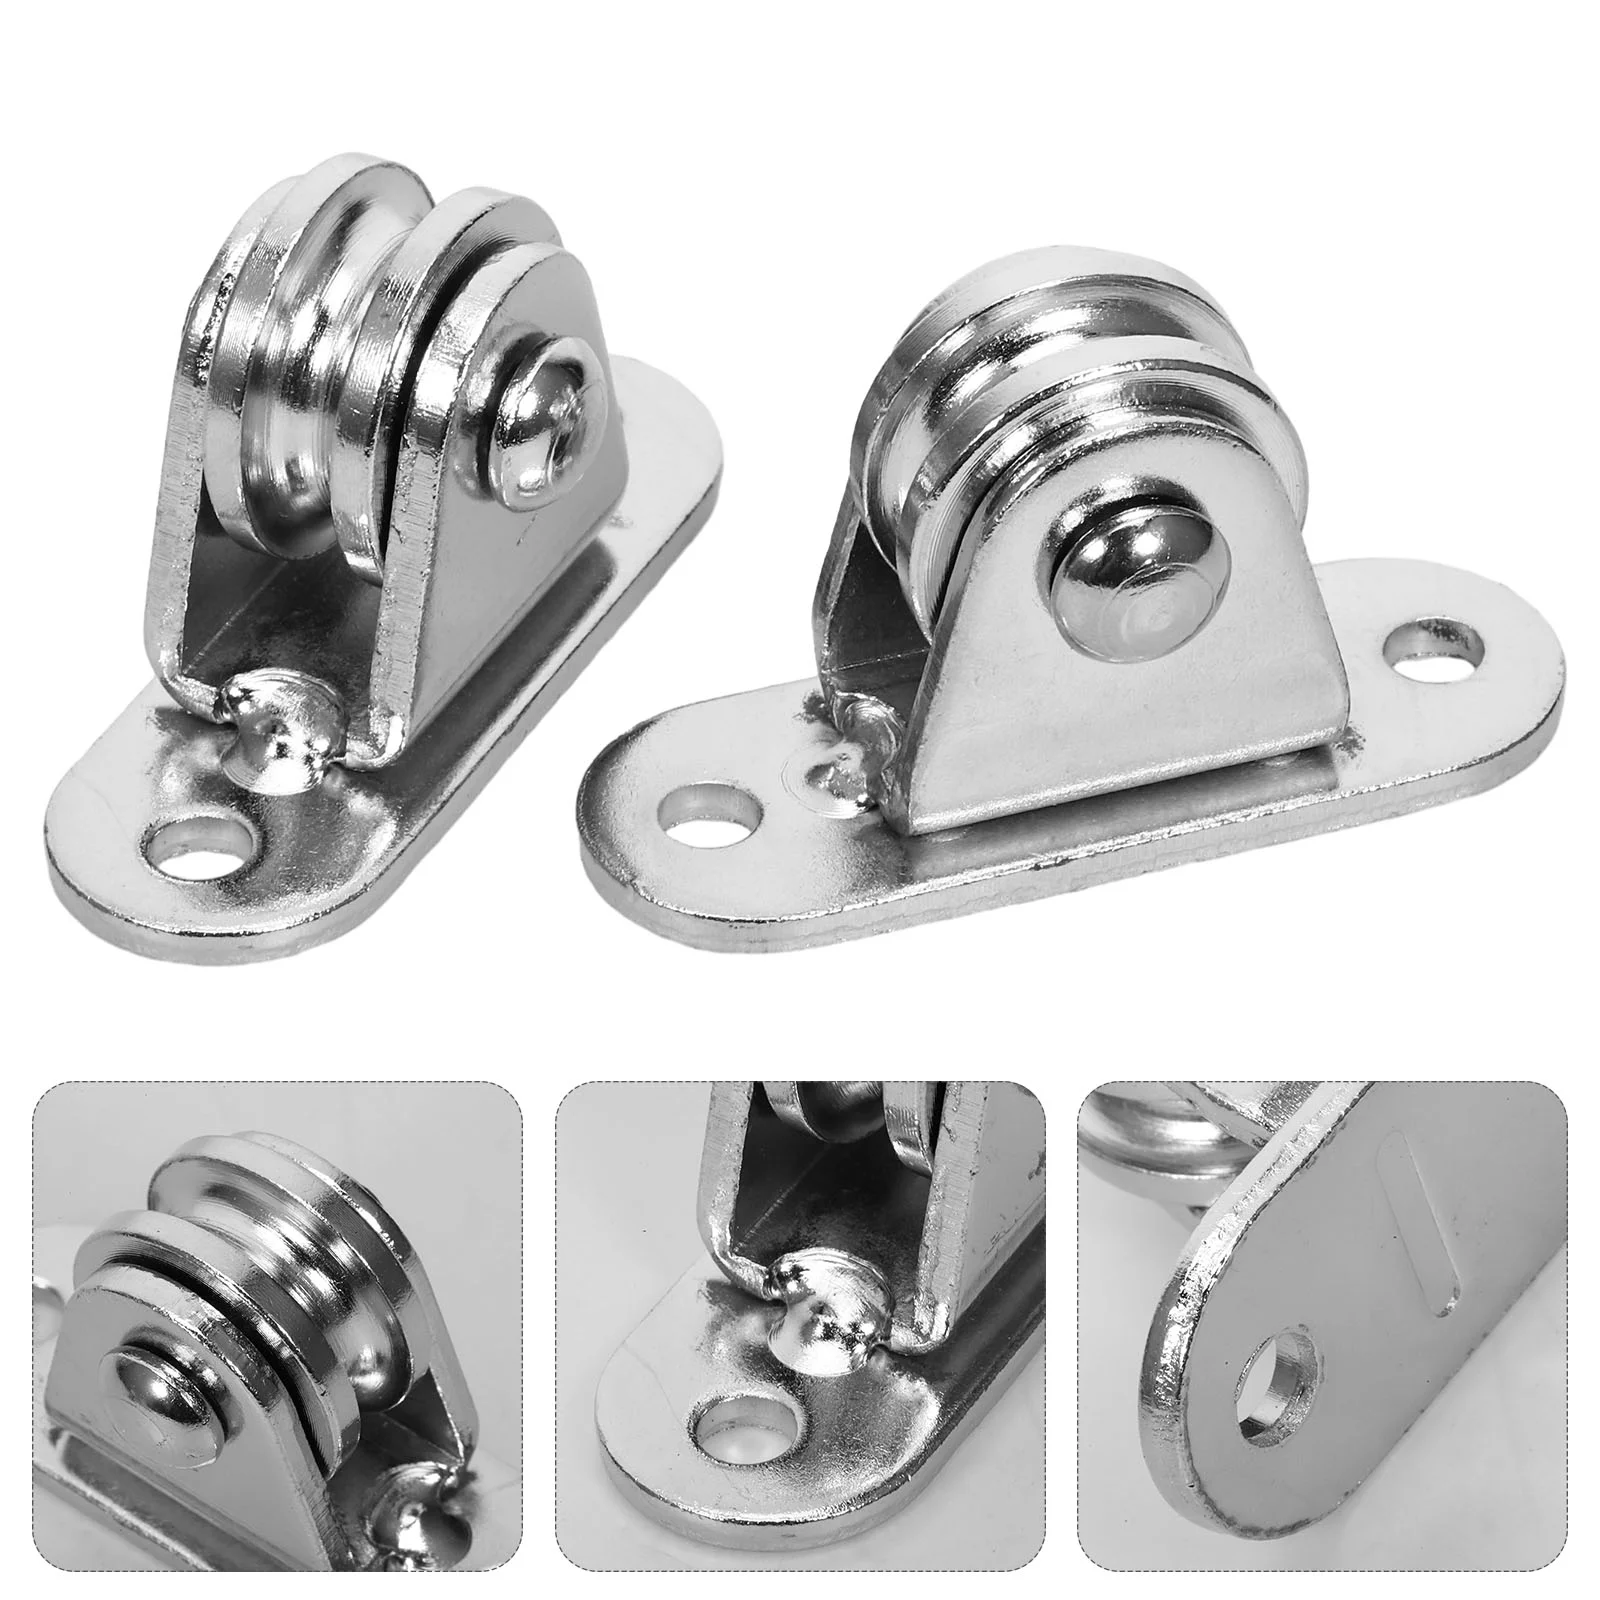 

2 Sets Pulley Block Cable Pulleys Ball Bearing Rollers Wire Rope Wheel Garage Door Stainless Steel